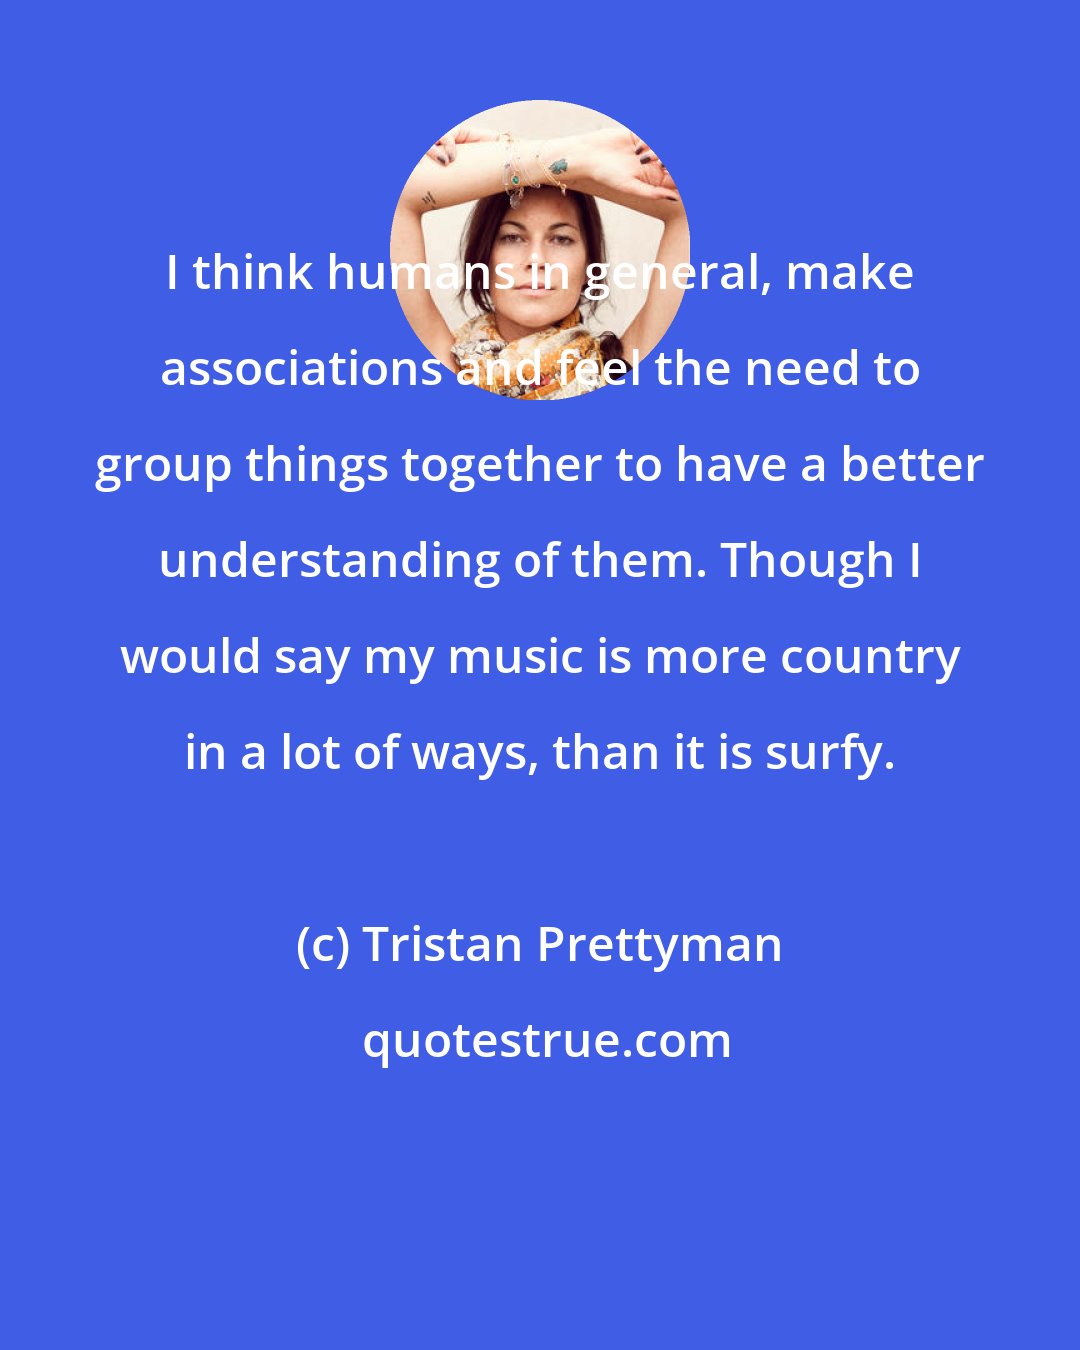 Tristan Prettyman: I think humans in general, make associations and feel the need to group things together to have a better understanding of them. Though I would say my music is more country in a lot of ways, than it is surfy.